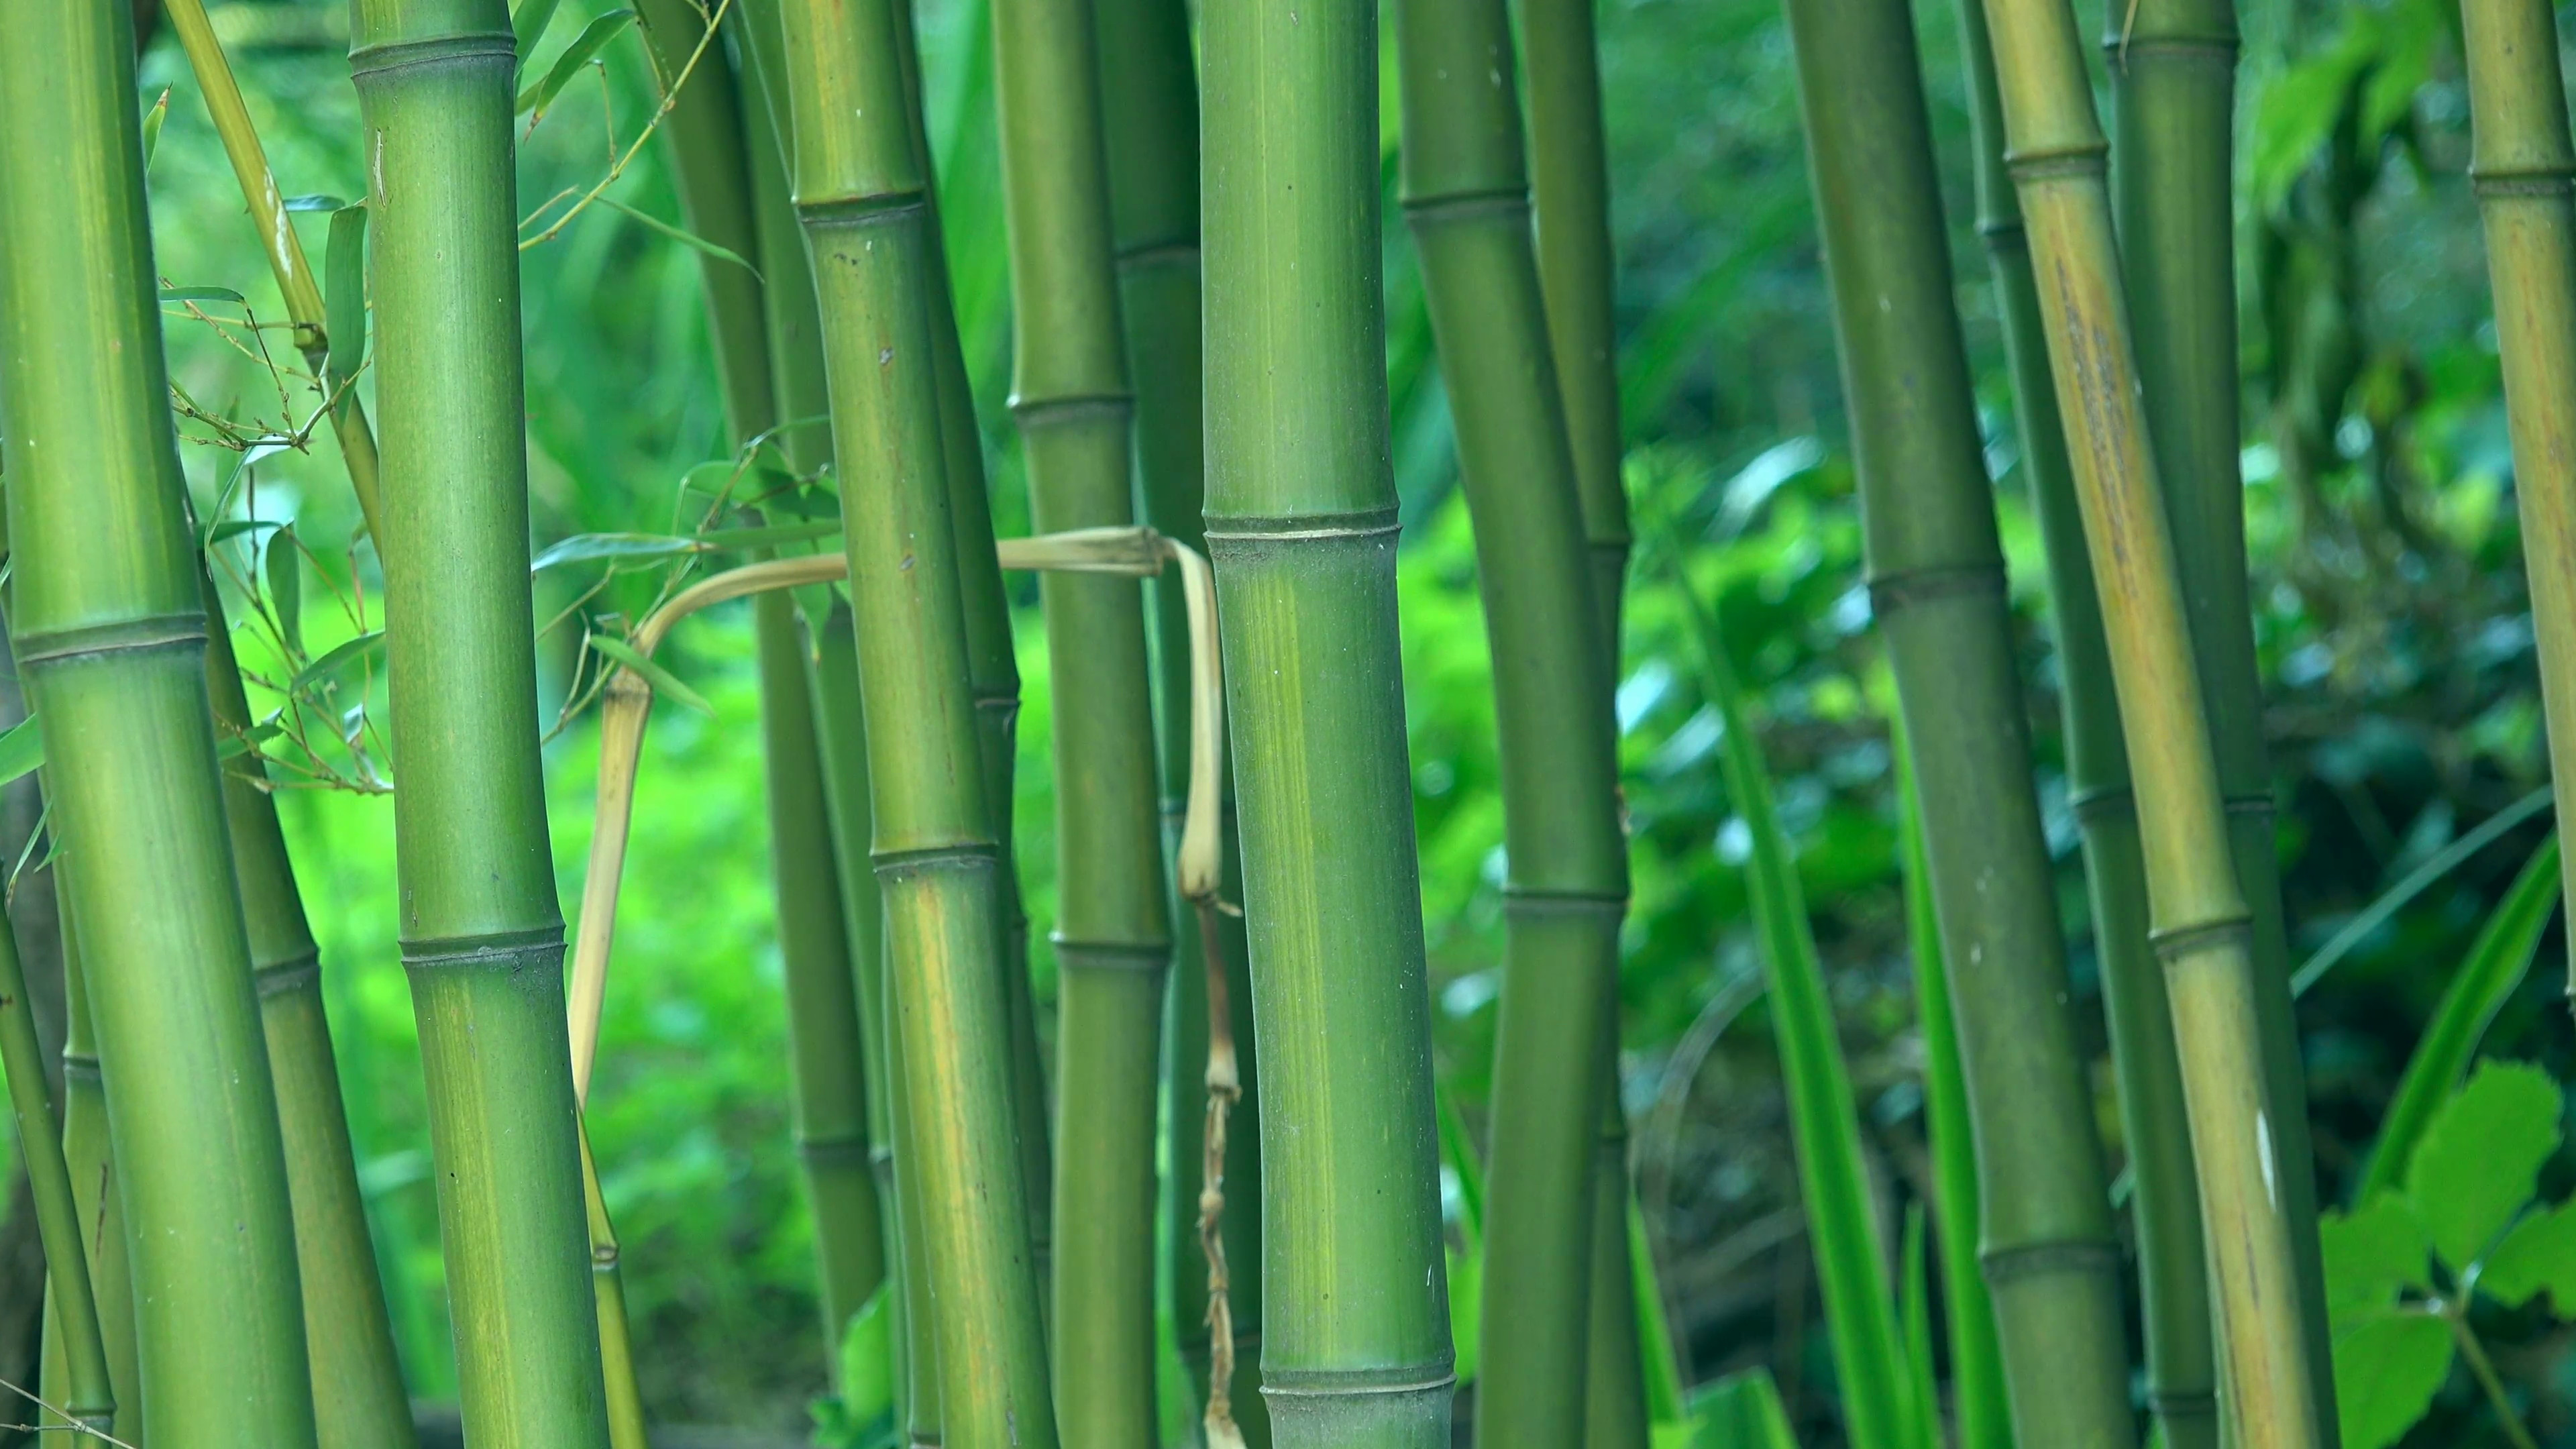 3840x2160 Green bamboo trees as background, bamboo forest detail, 4k uhd footage,  , 2160p. Stock Video Footage - VideoBlocks